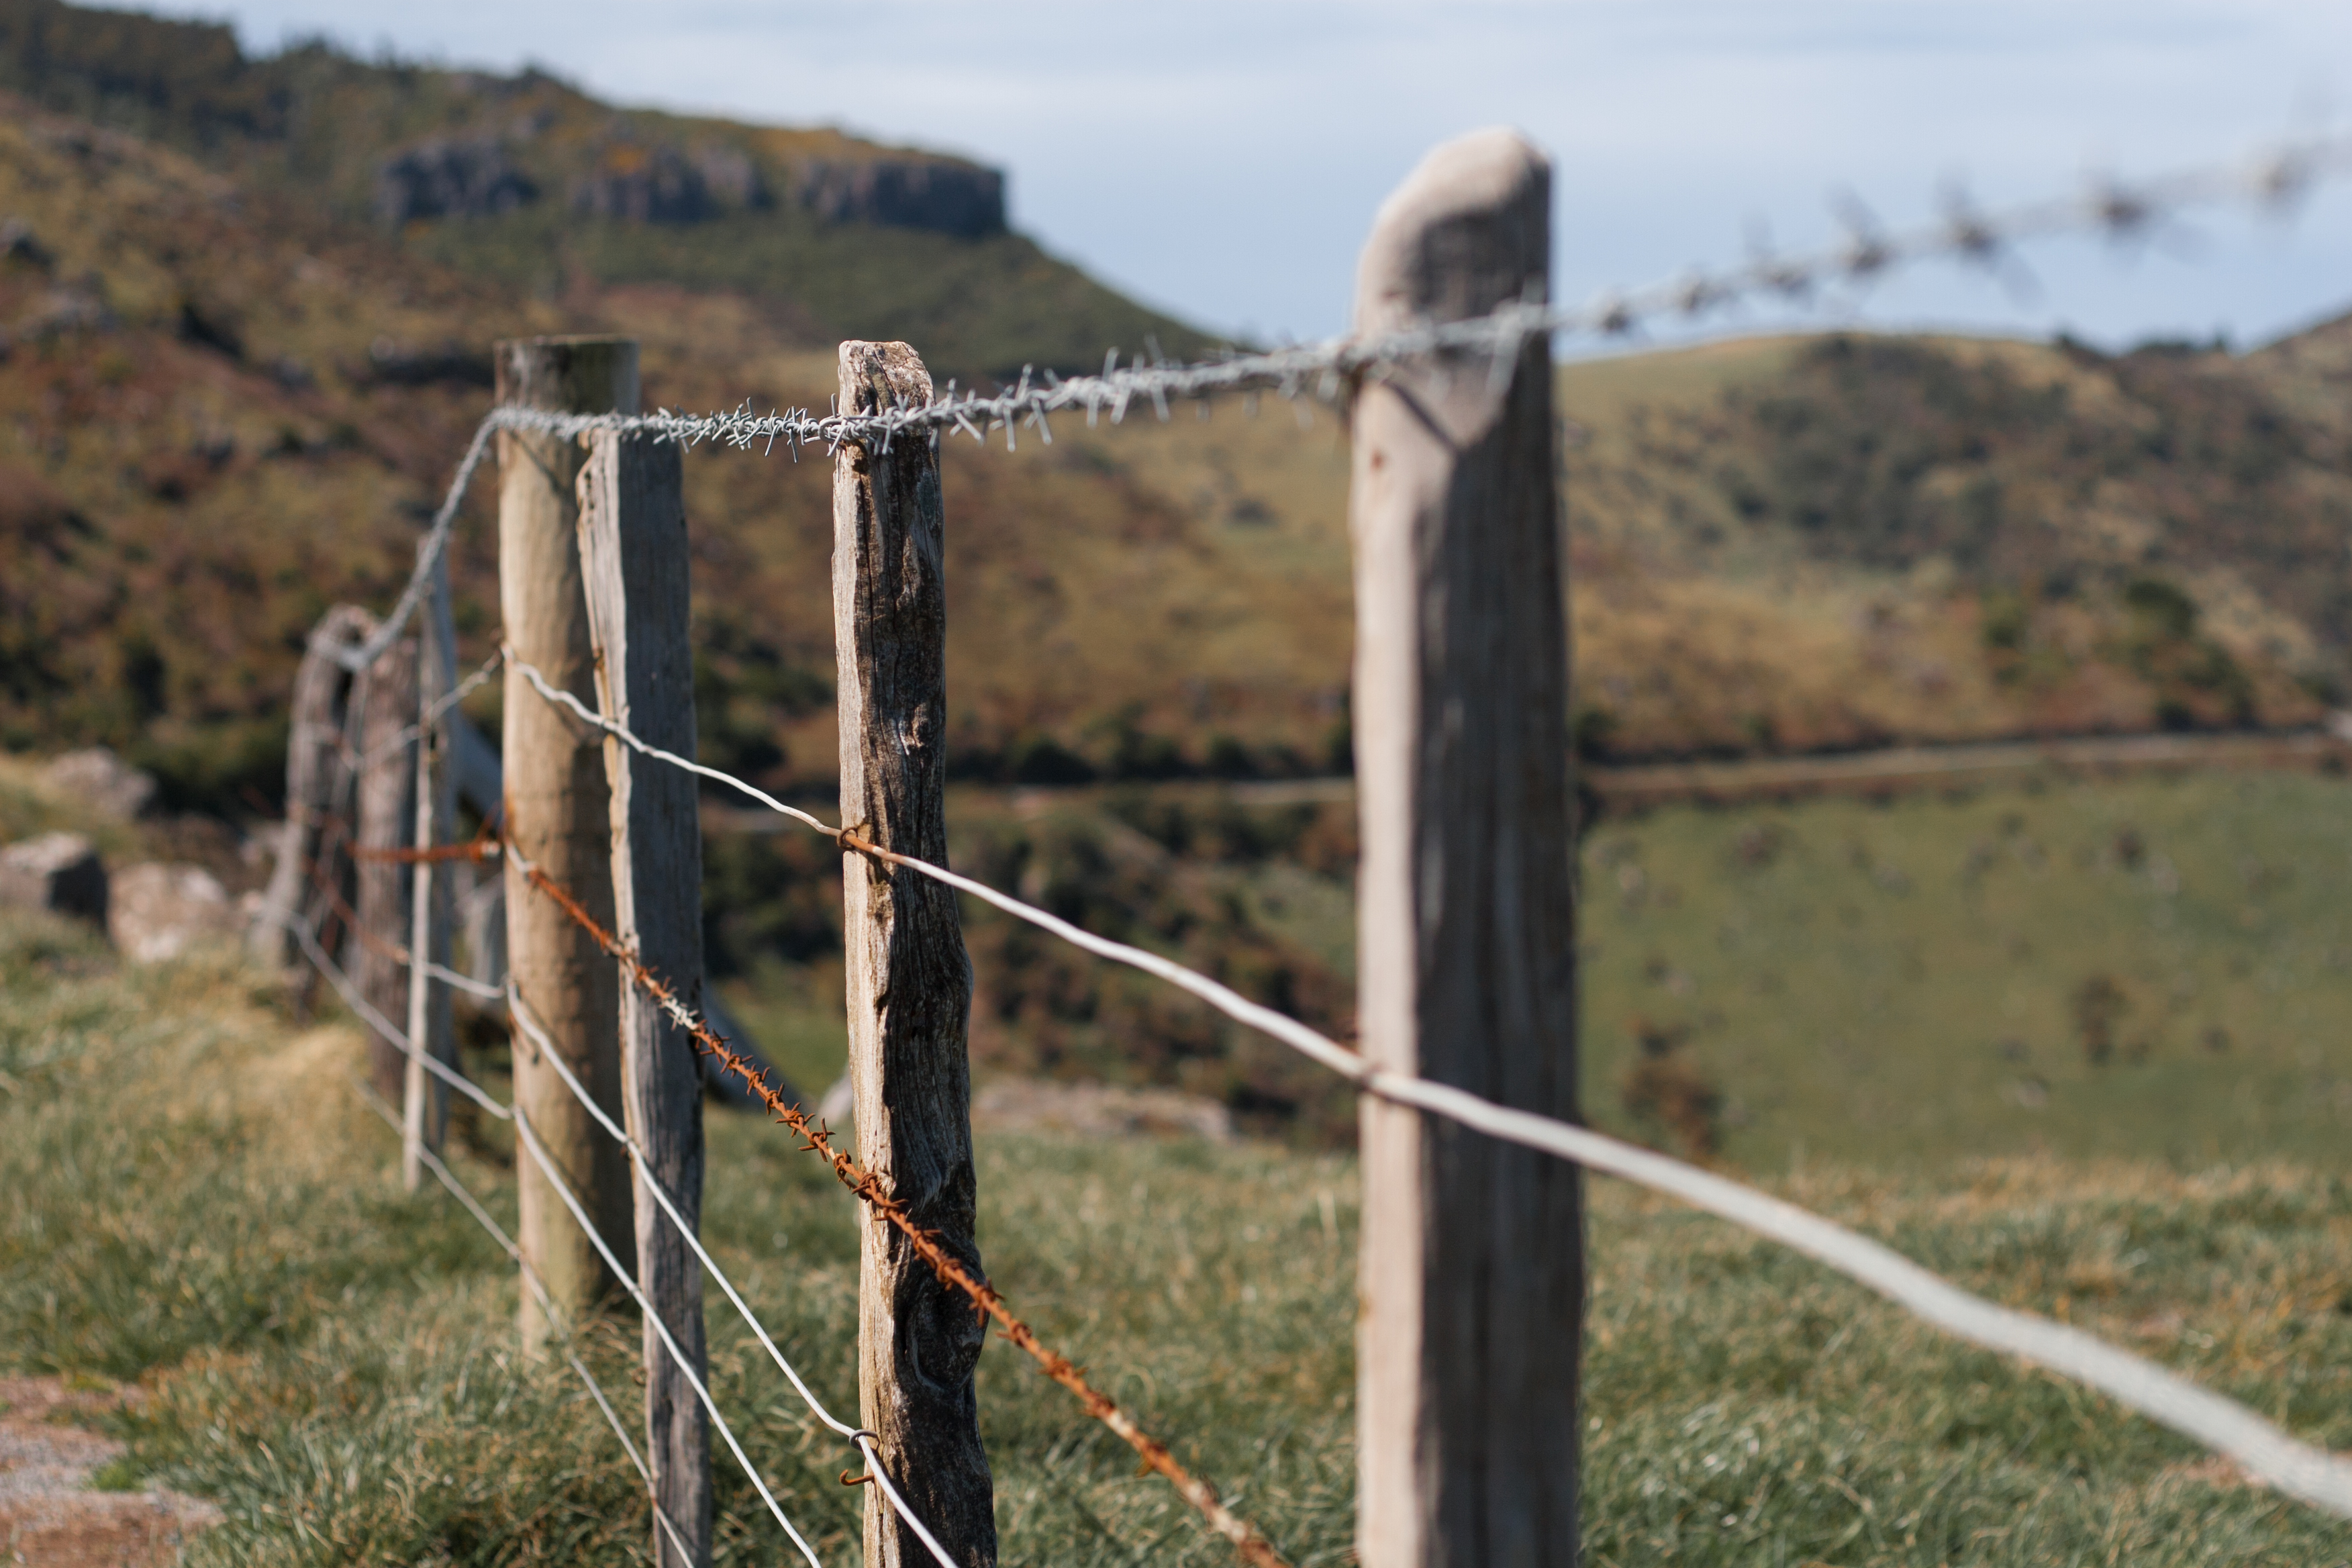 rusted barbed wire on a rural fence post